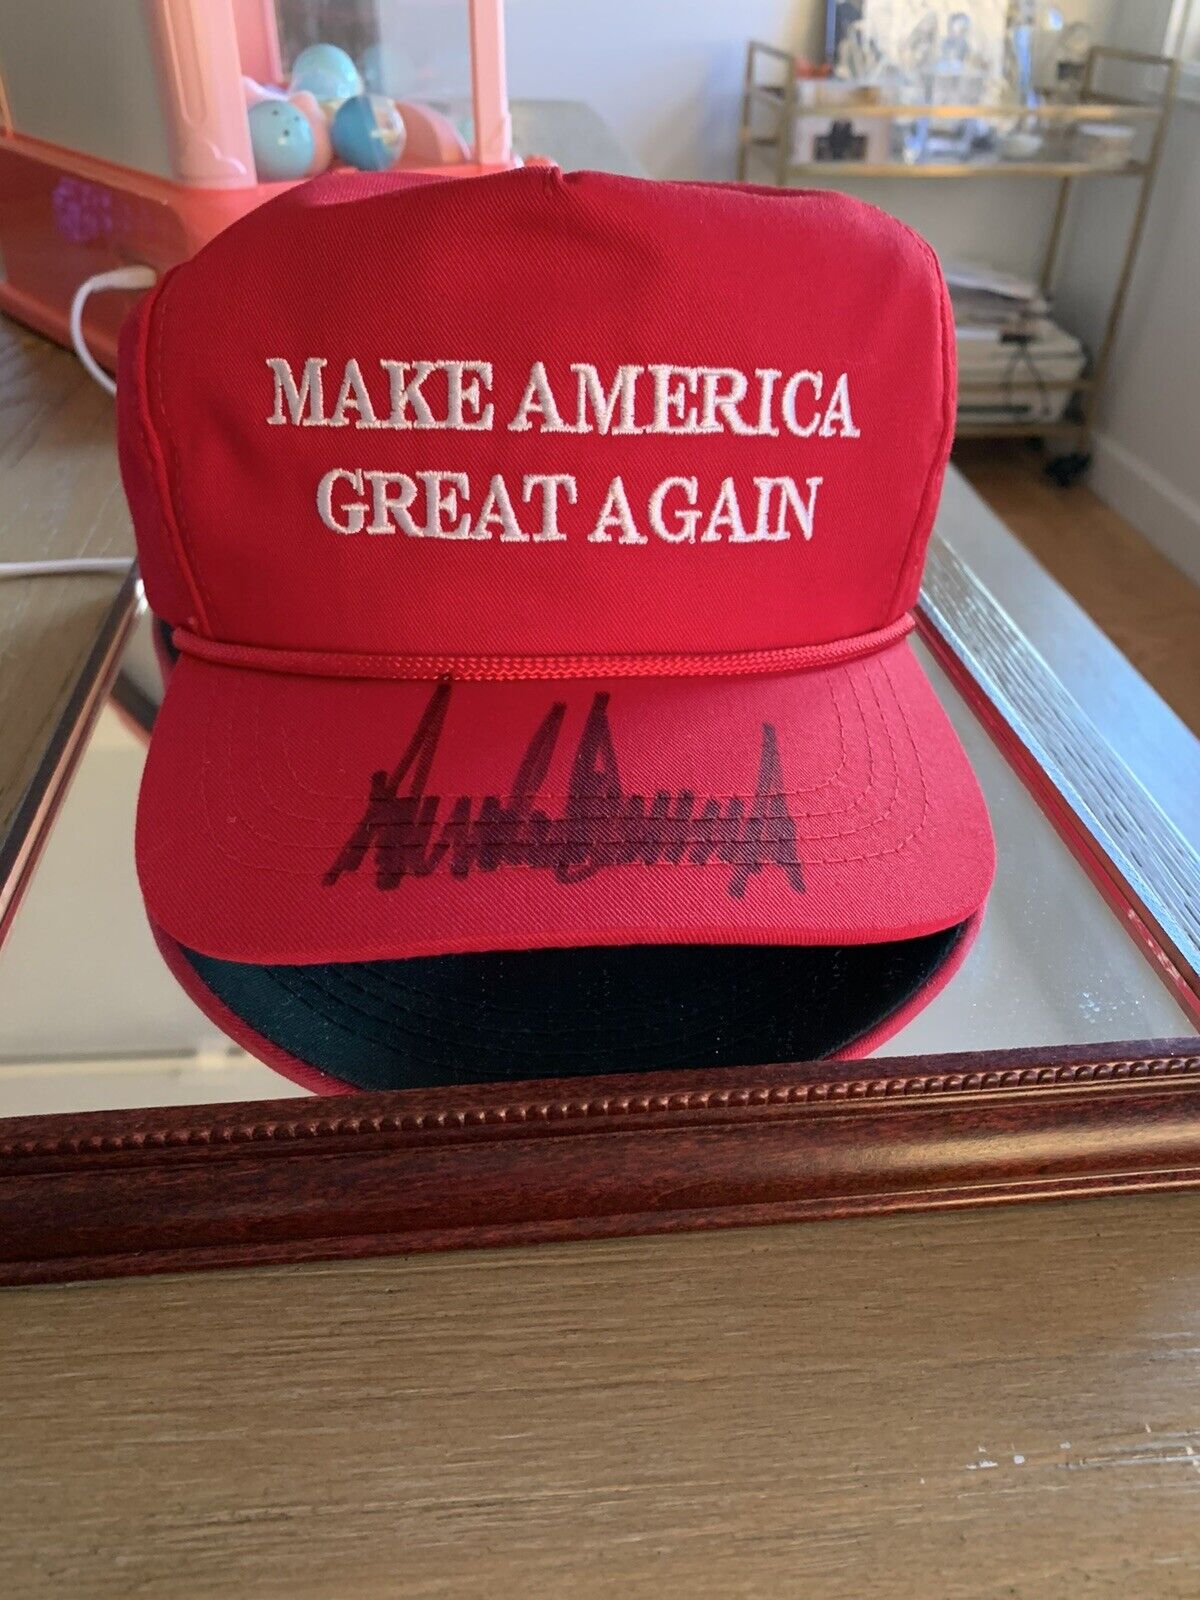 President DONALD TRUMP Autographed MAGA Hat “MAKE AMERICA GREAT AGAIN” SIGNED